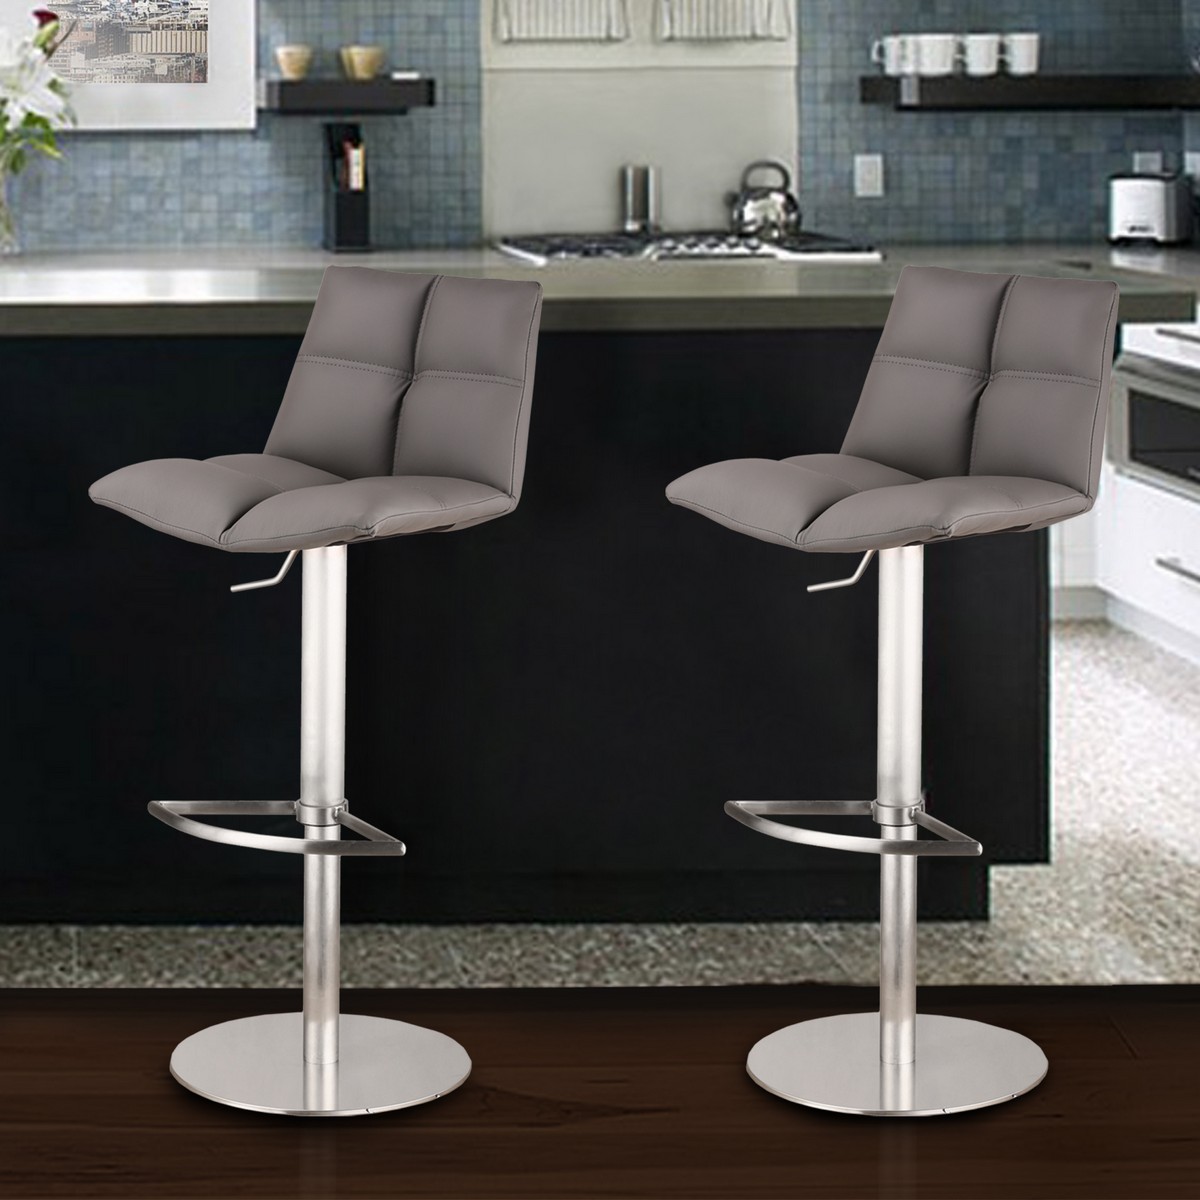 Armen Living Roma Adjustable Brushed Stainless Steel Barstool in Gray Leatherette